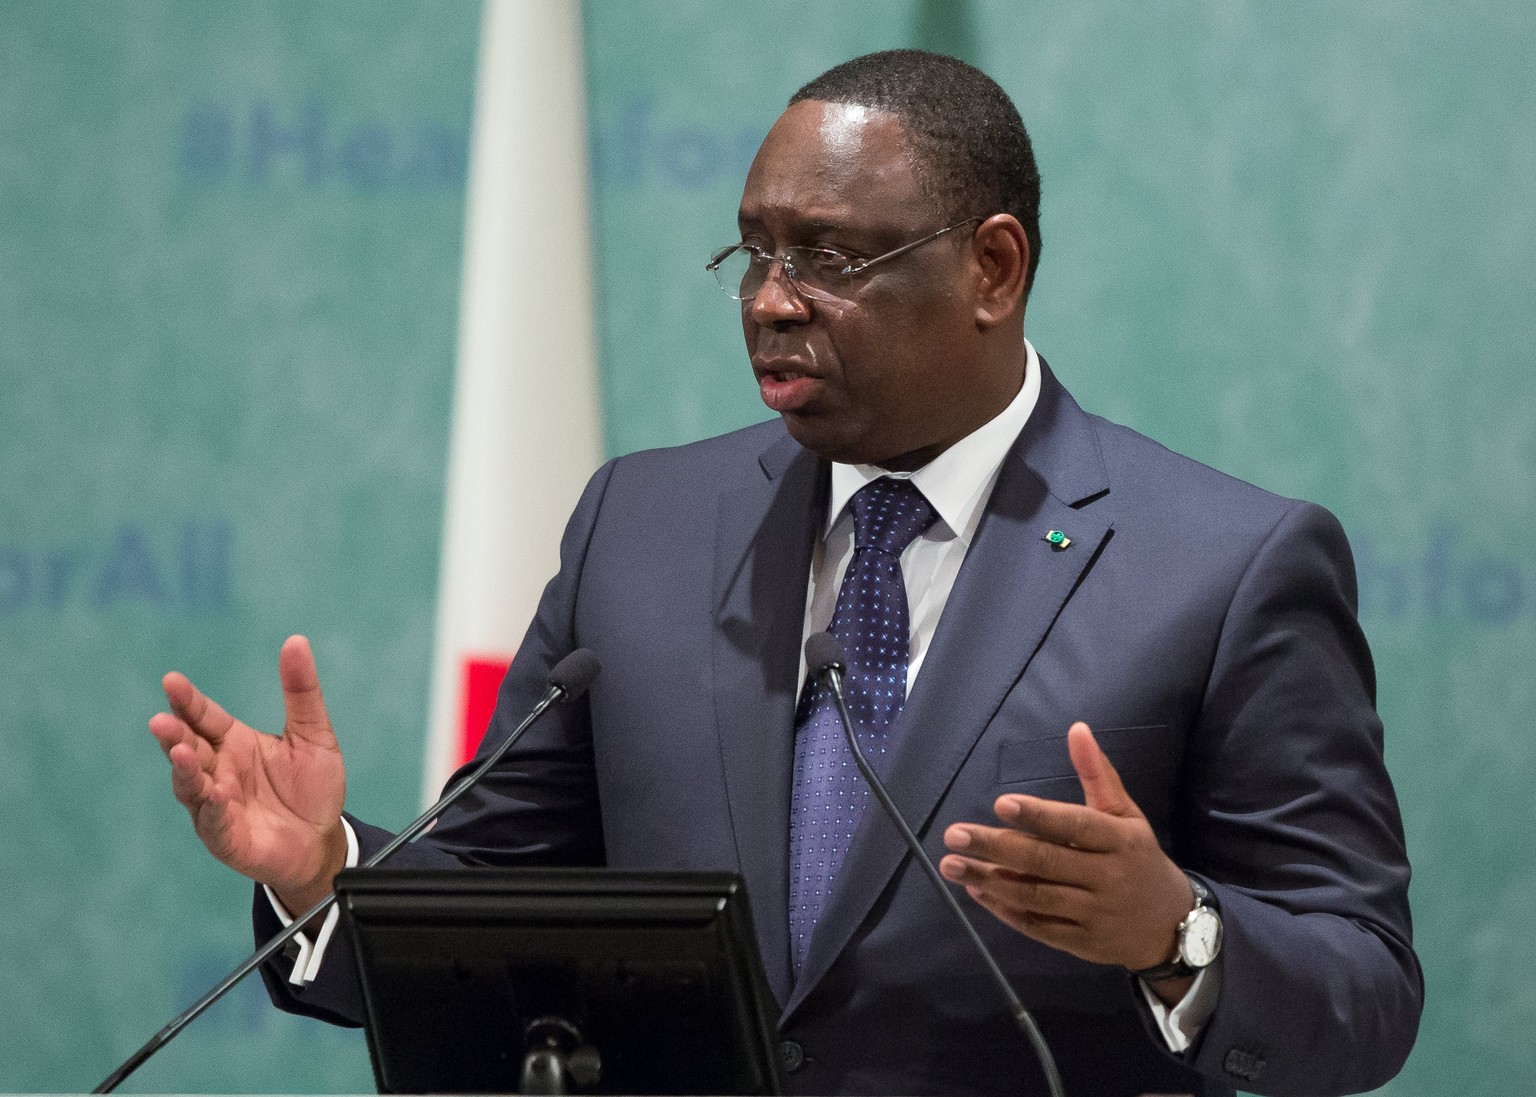 epa06388333 President of Senegal Macky Sall delivers a speech during the Universal Health Coverage Forum (UHC Forum) in Tokyo, Japan, 14 December 2017. Some 300 high-level policymakers gathered during ...